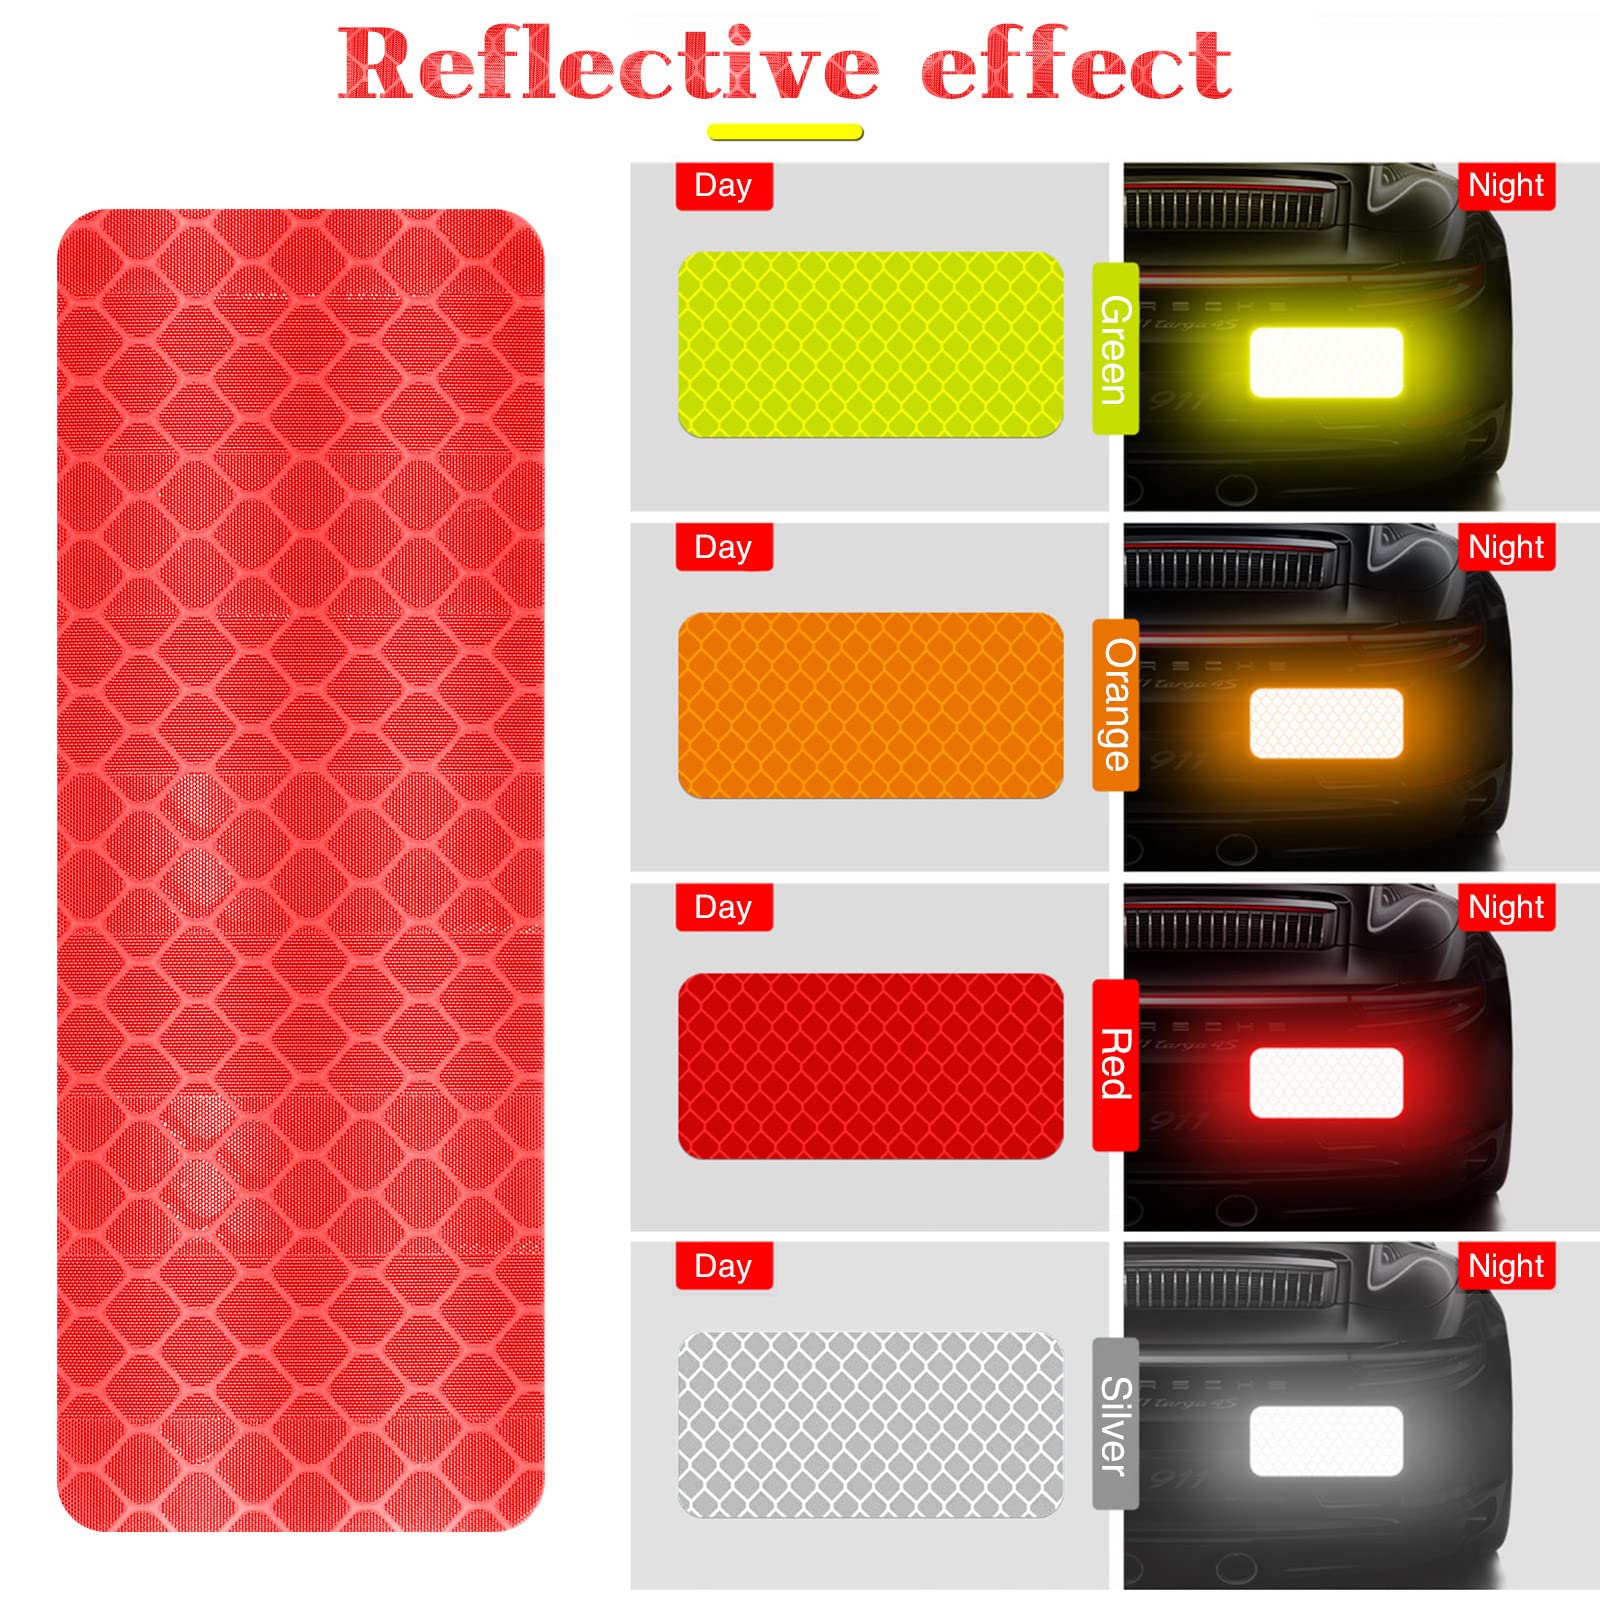 Pimoys 120 Pcs Reflective Tape, Reflective Stickers Reflector Tape Night Visibility Trailer Reflective Tape for Bikes Clothing Helmet (1.2×3.2 Inch, 2×2Inch)